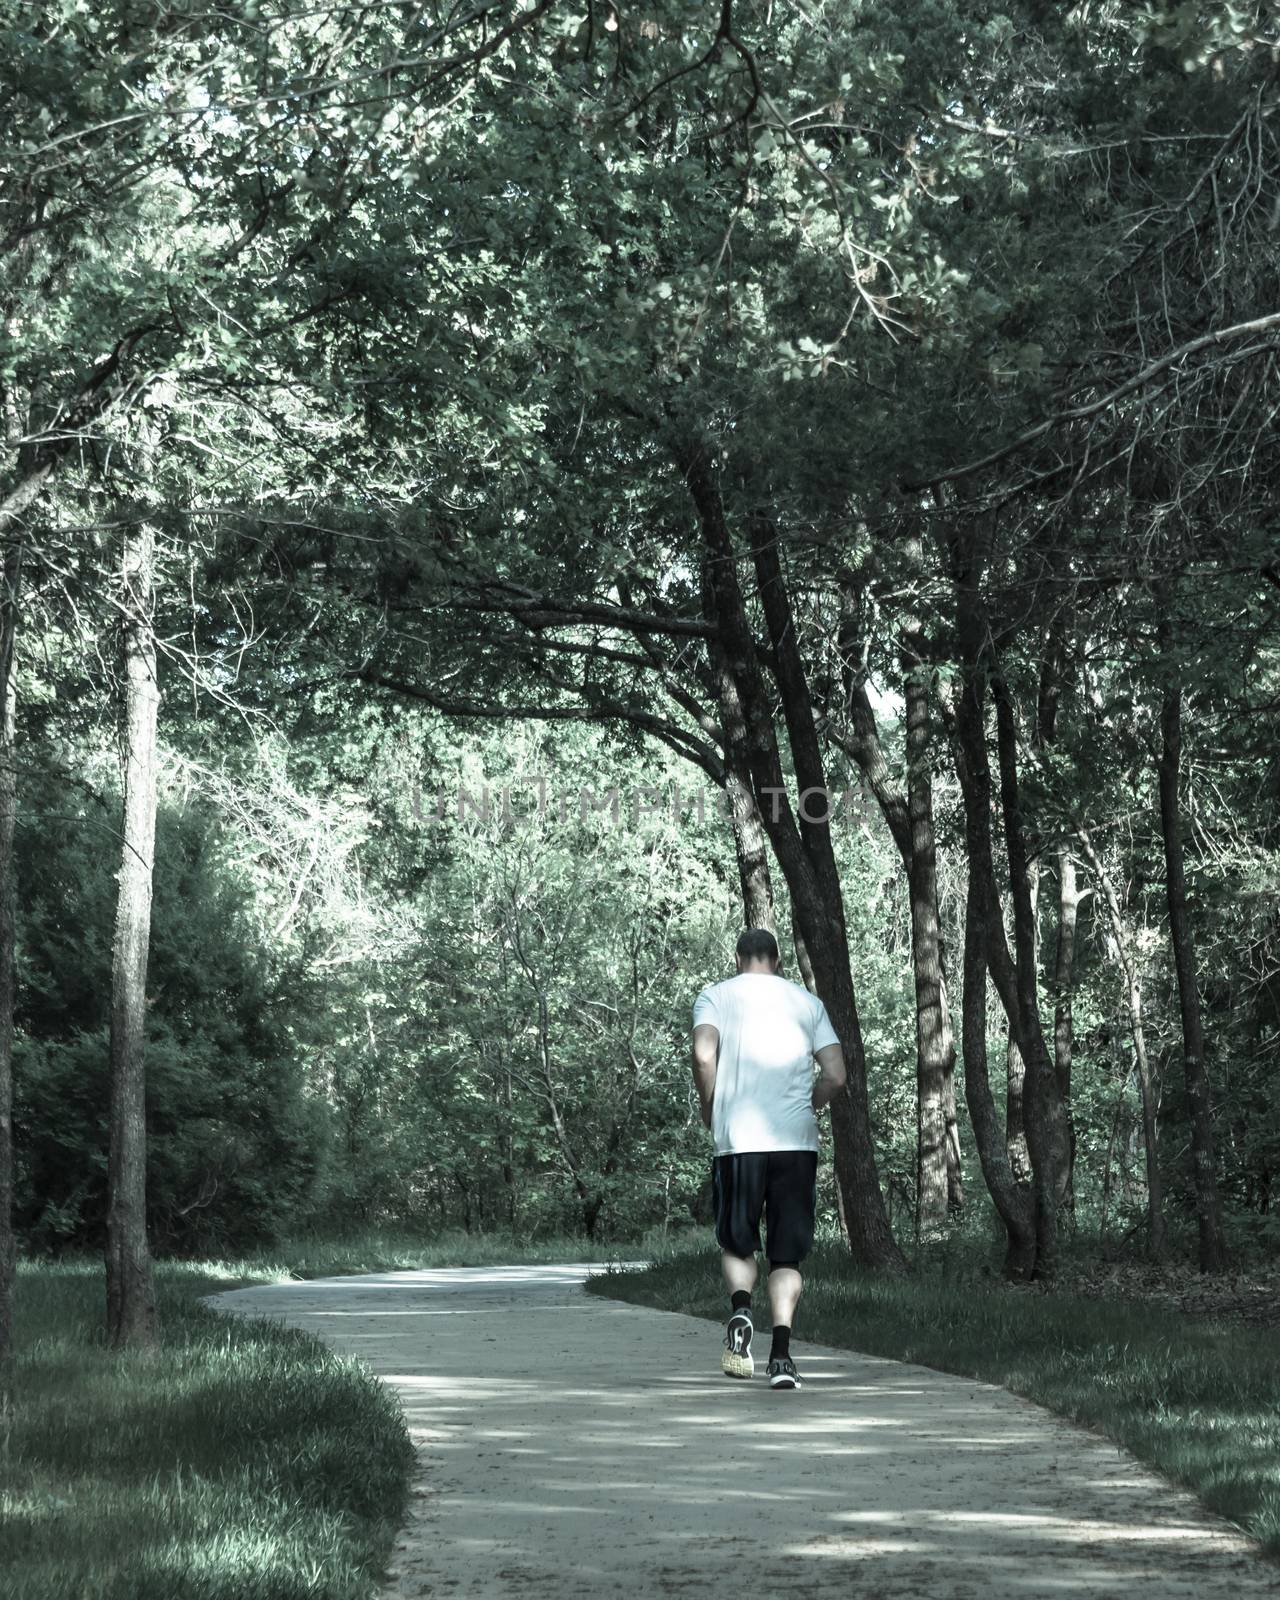 Healthy man running in the s-curved pathway in park near Dallas, by trongnguyen